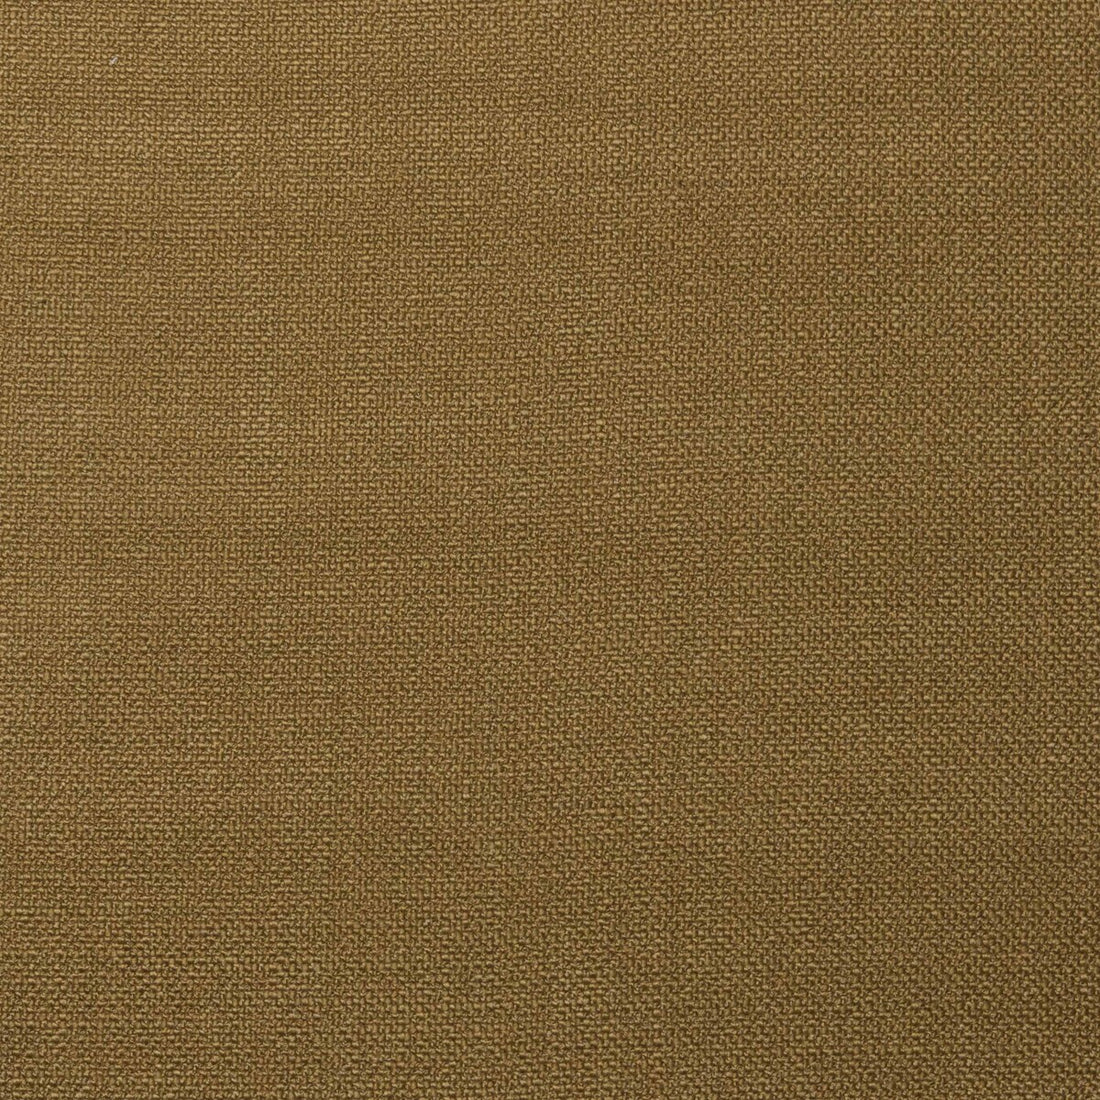 Shaba fabric in oro color - pattern GDT5428.10.0 - by Gaston y Daniela in the Gaston Africalia collection